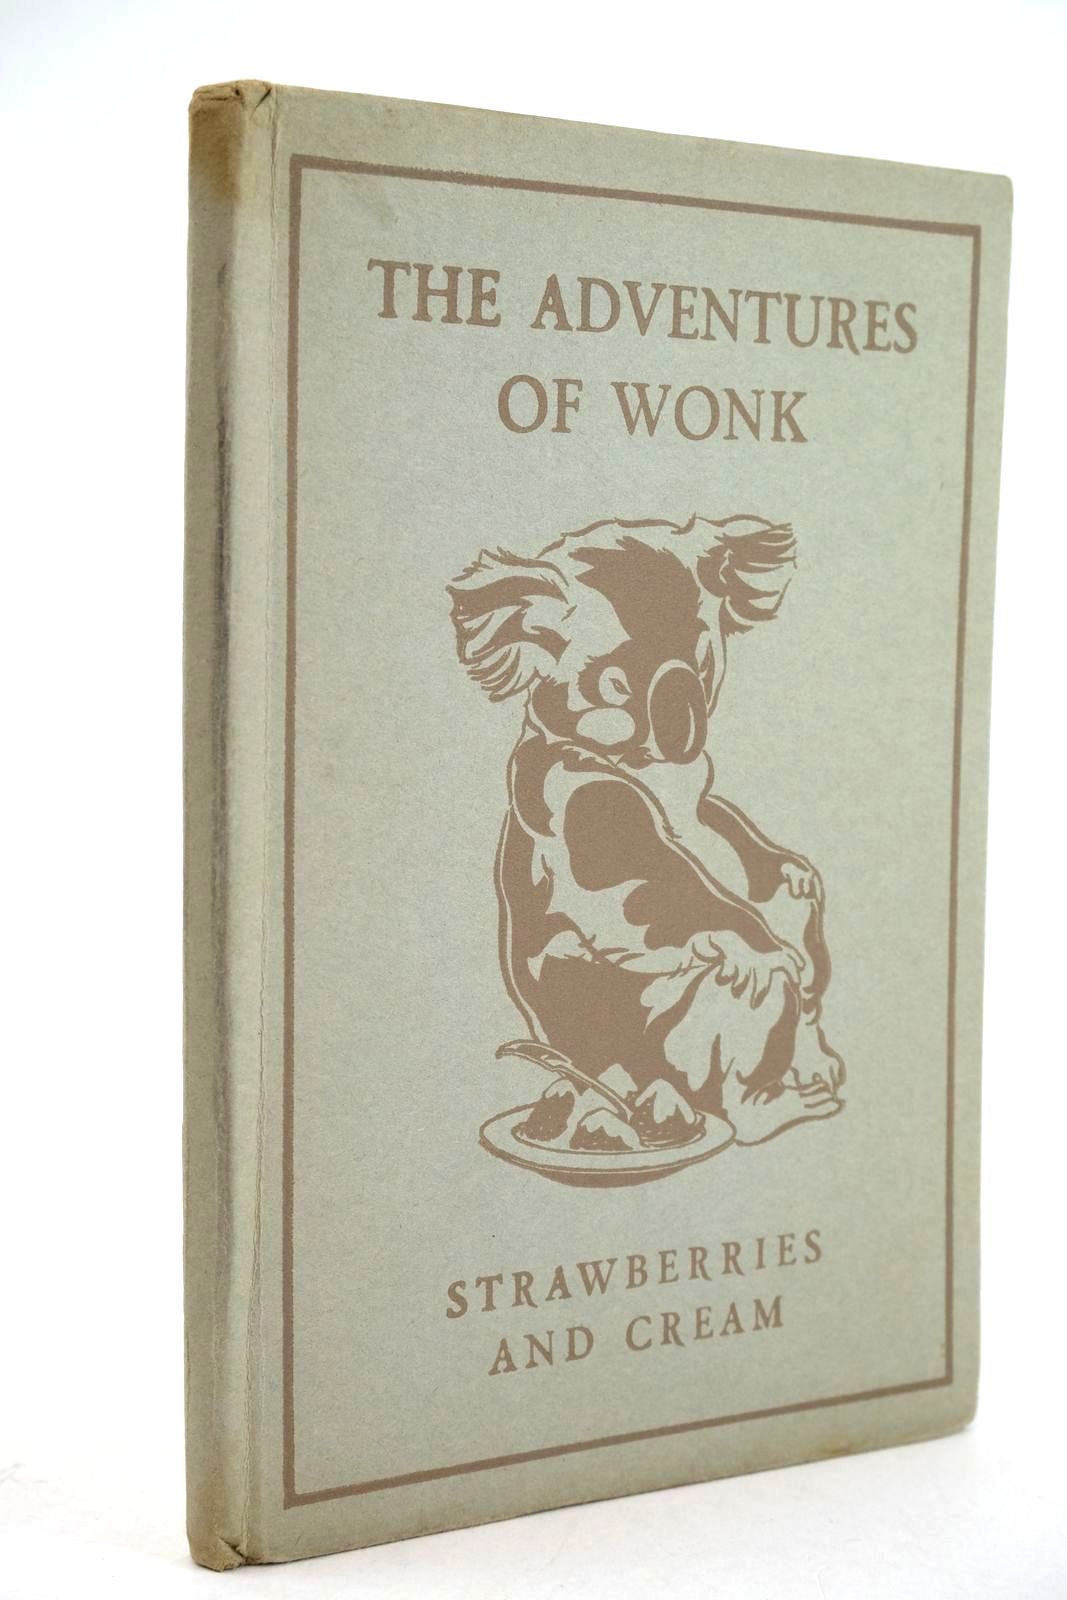 Photo of THE ADVENTURES OF WONK - STRAWBERRIES AND CREAM written by Levy, Muriel illustrated by Kiddell-Monroe, Joan published by Wills & Hepworth Ltd. (STOCK CODE: 1324390)  for sale by Stella & Rose's Books